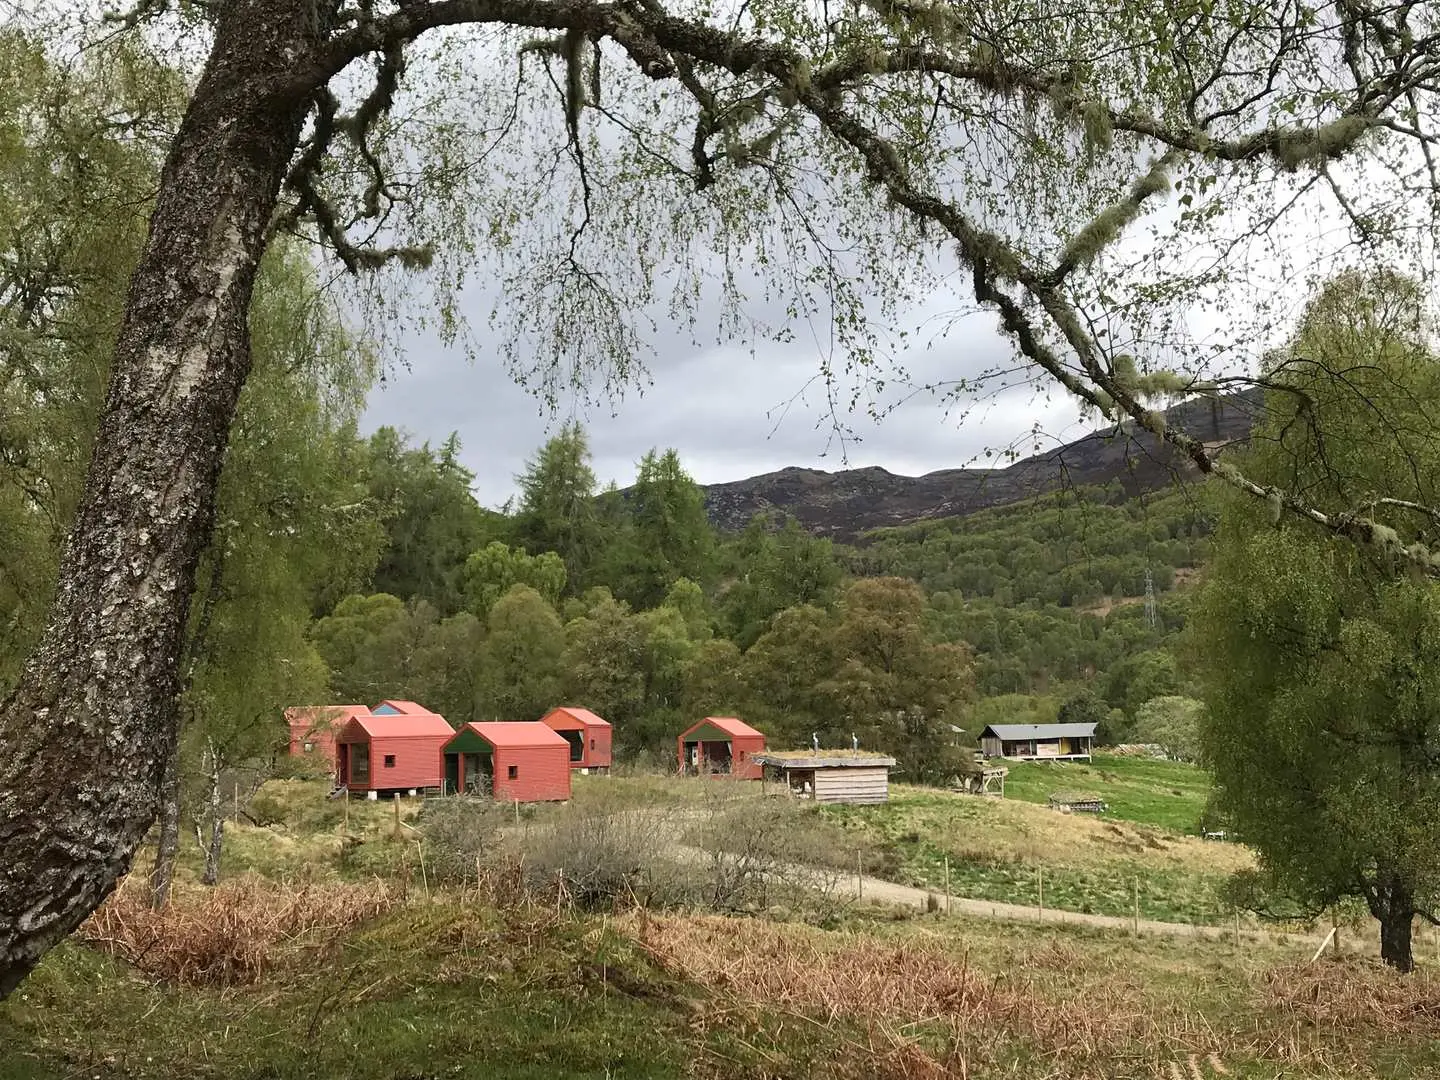 We have two different sites: our original off-grid centre at Struy, near Beauly which can host folk overnight, and our second site at Gartymore, near Helmsdale, on which we are building a classroom and will run courses on a day basis.